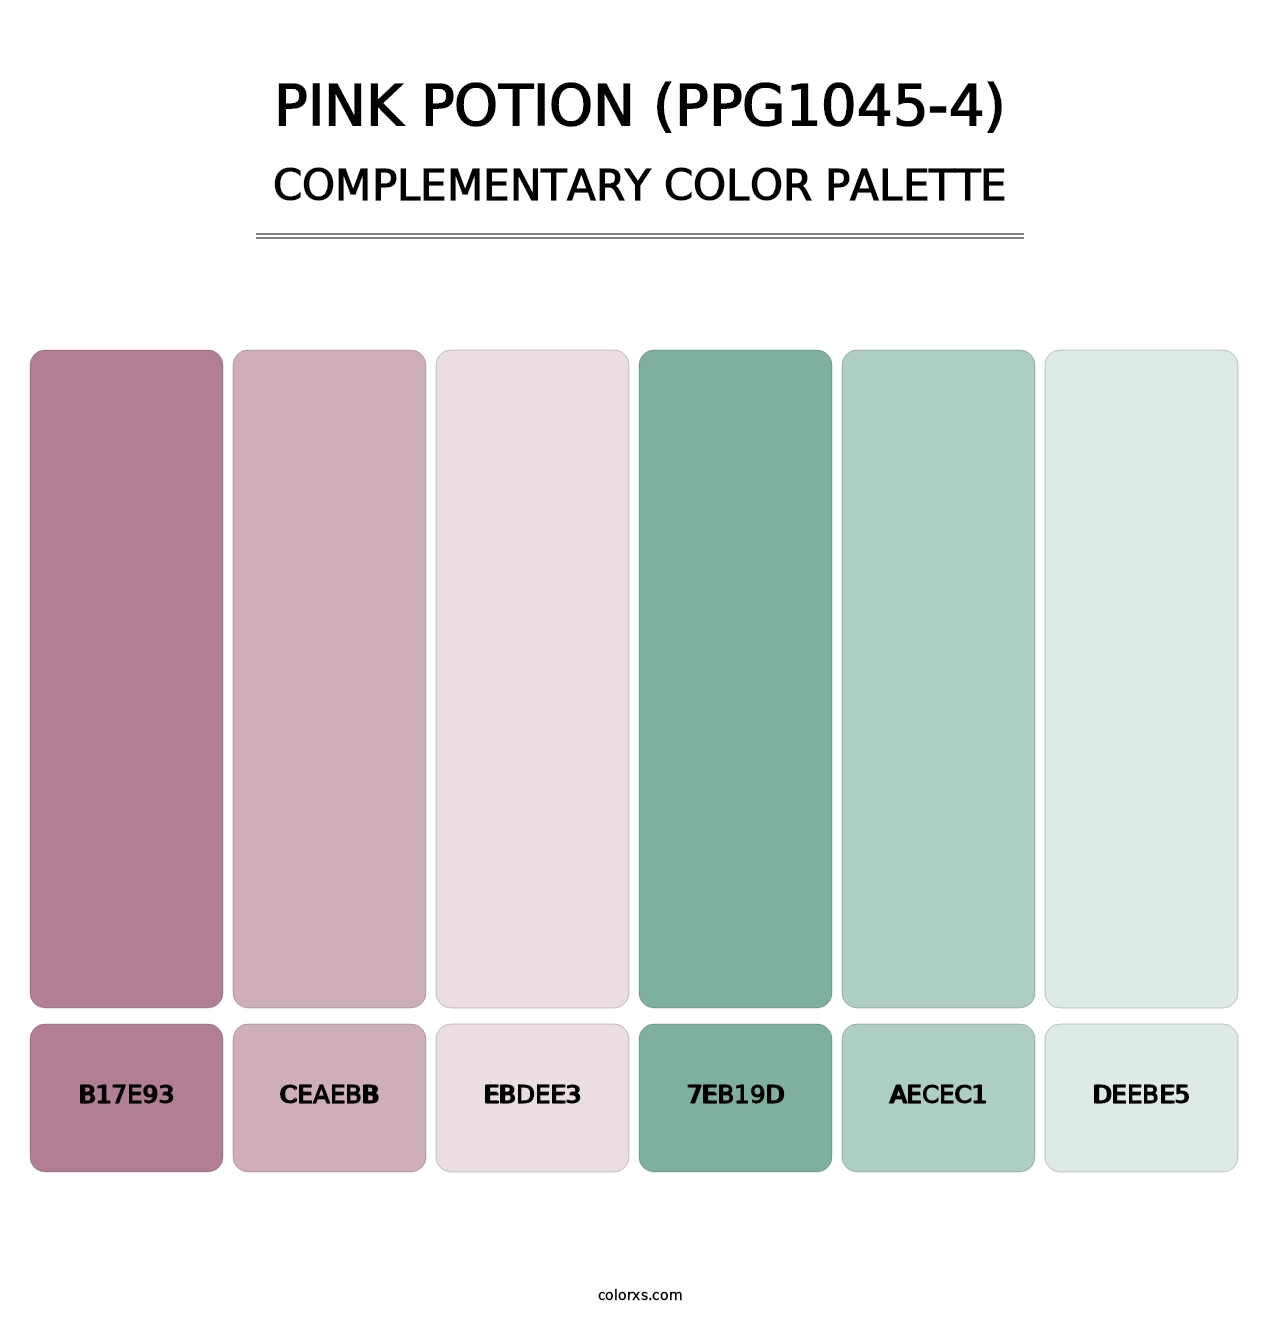 Pink Potion (PPG1045-4) - Complementary Color Palette